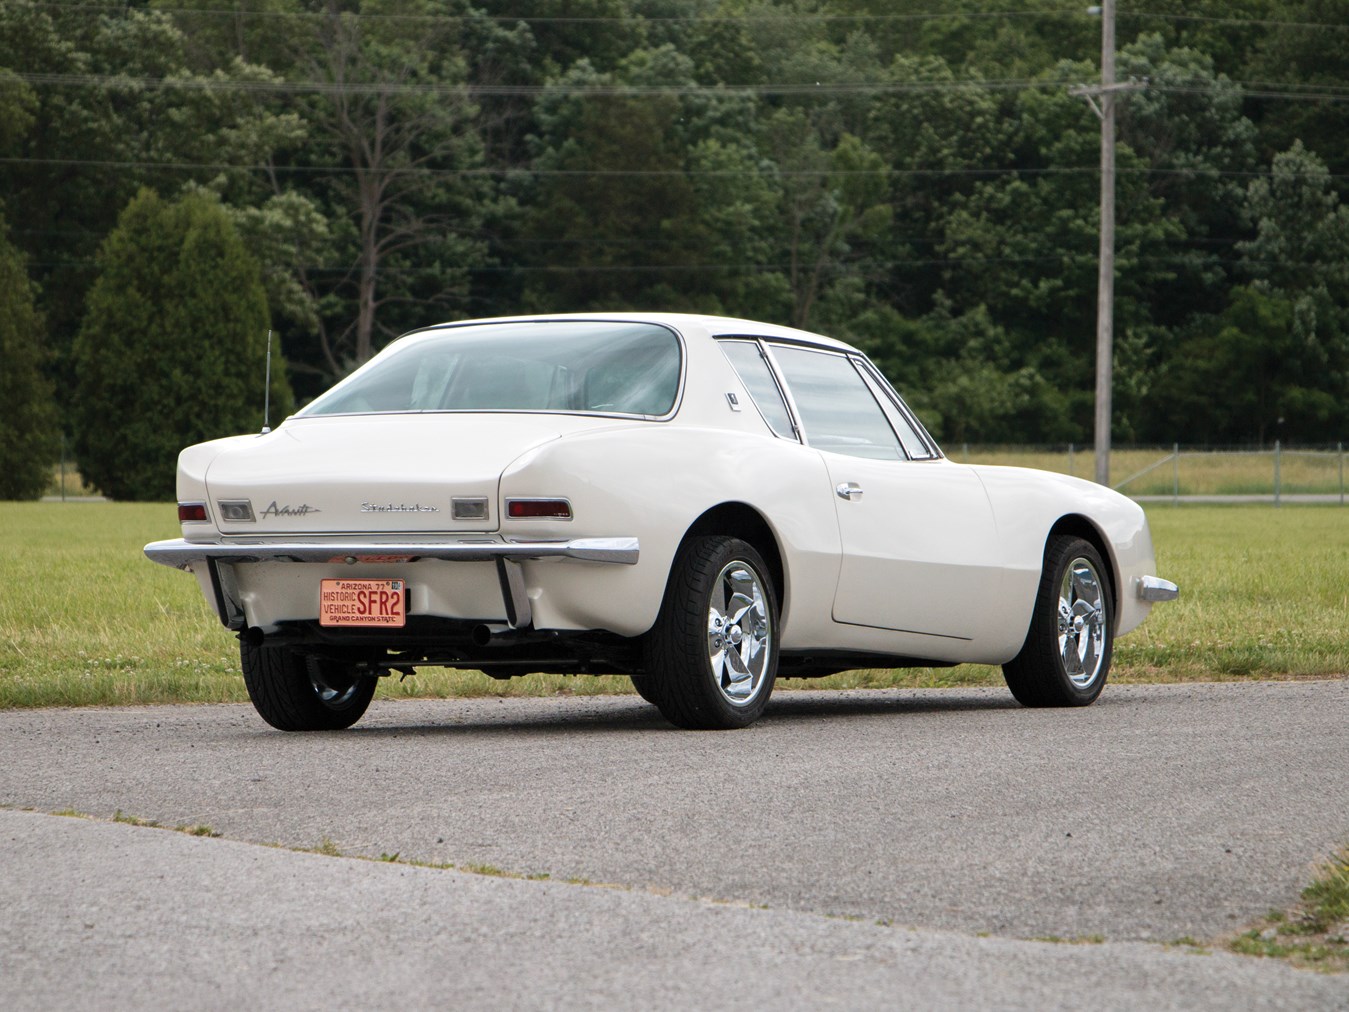 The Avanti had to be built on the existing Studebaker Lark chassis which mandated a somewhat front heavy style. The Avanti made that slightly dipped nose look stylish.